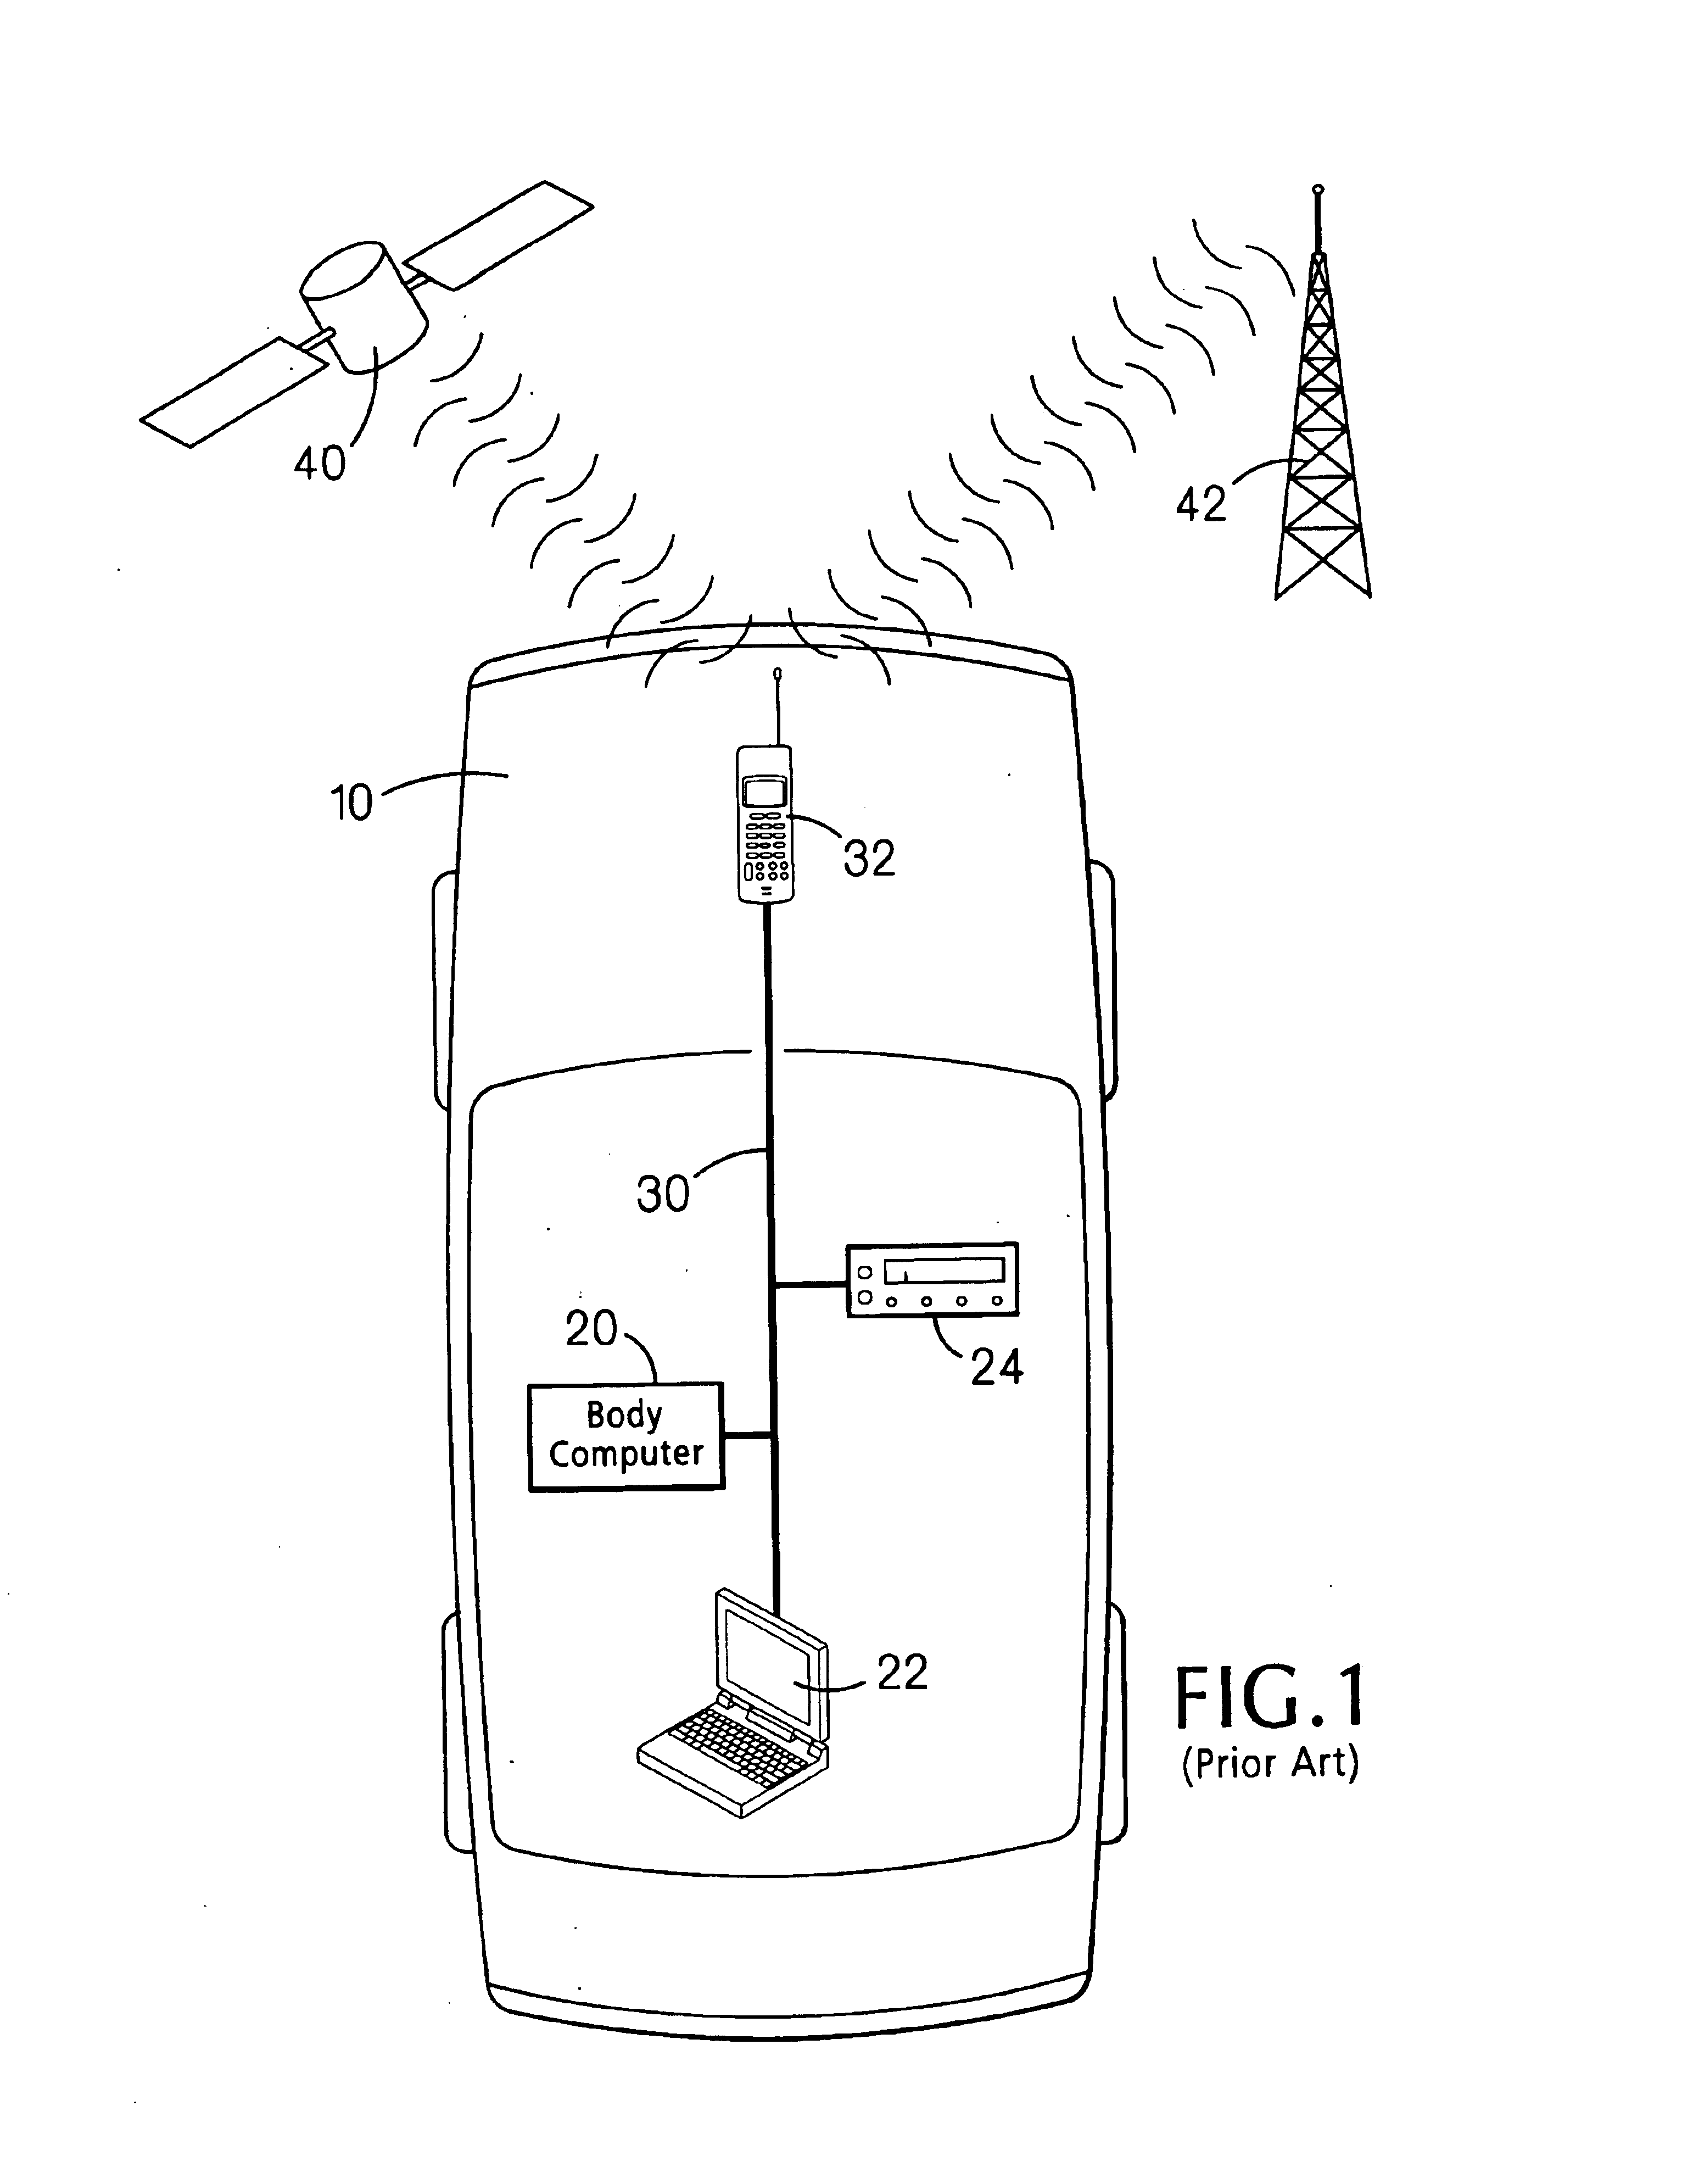 In-vehicle wireless local area network